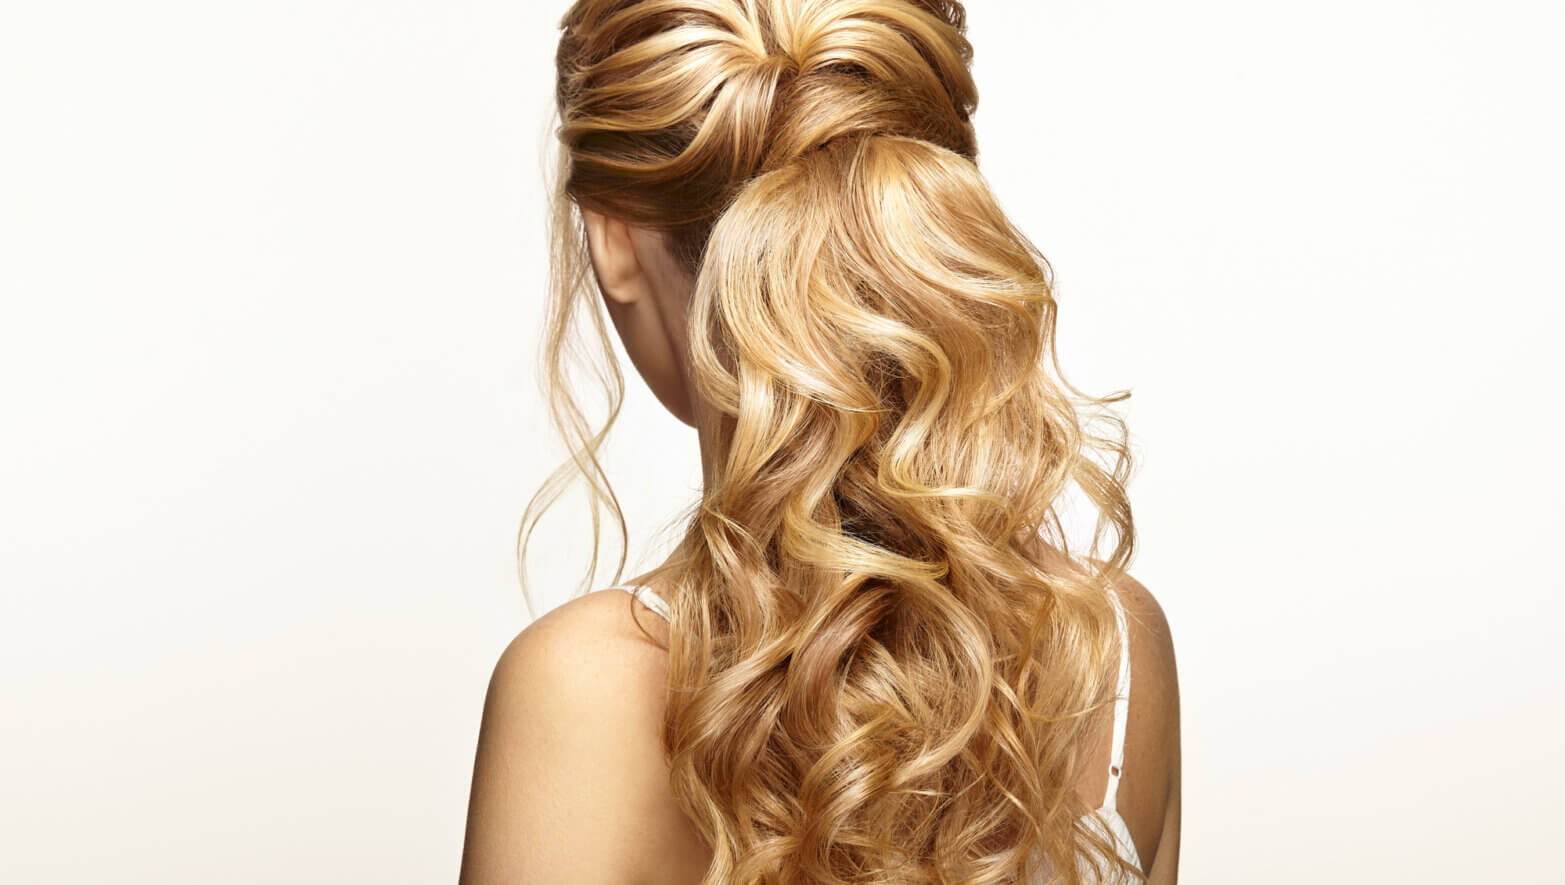 blonde-girl-long-shiny-curly-hair-blonde-girl-long-shiny-curly-hair-beautiful-model-woman-curly-hairstyle